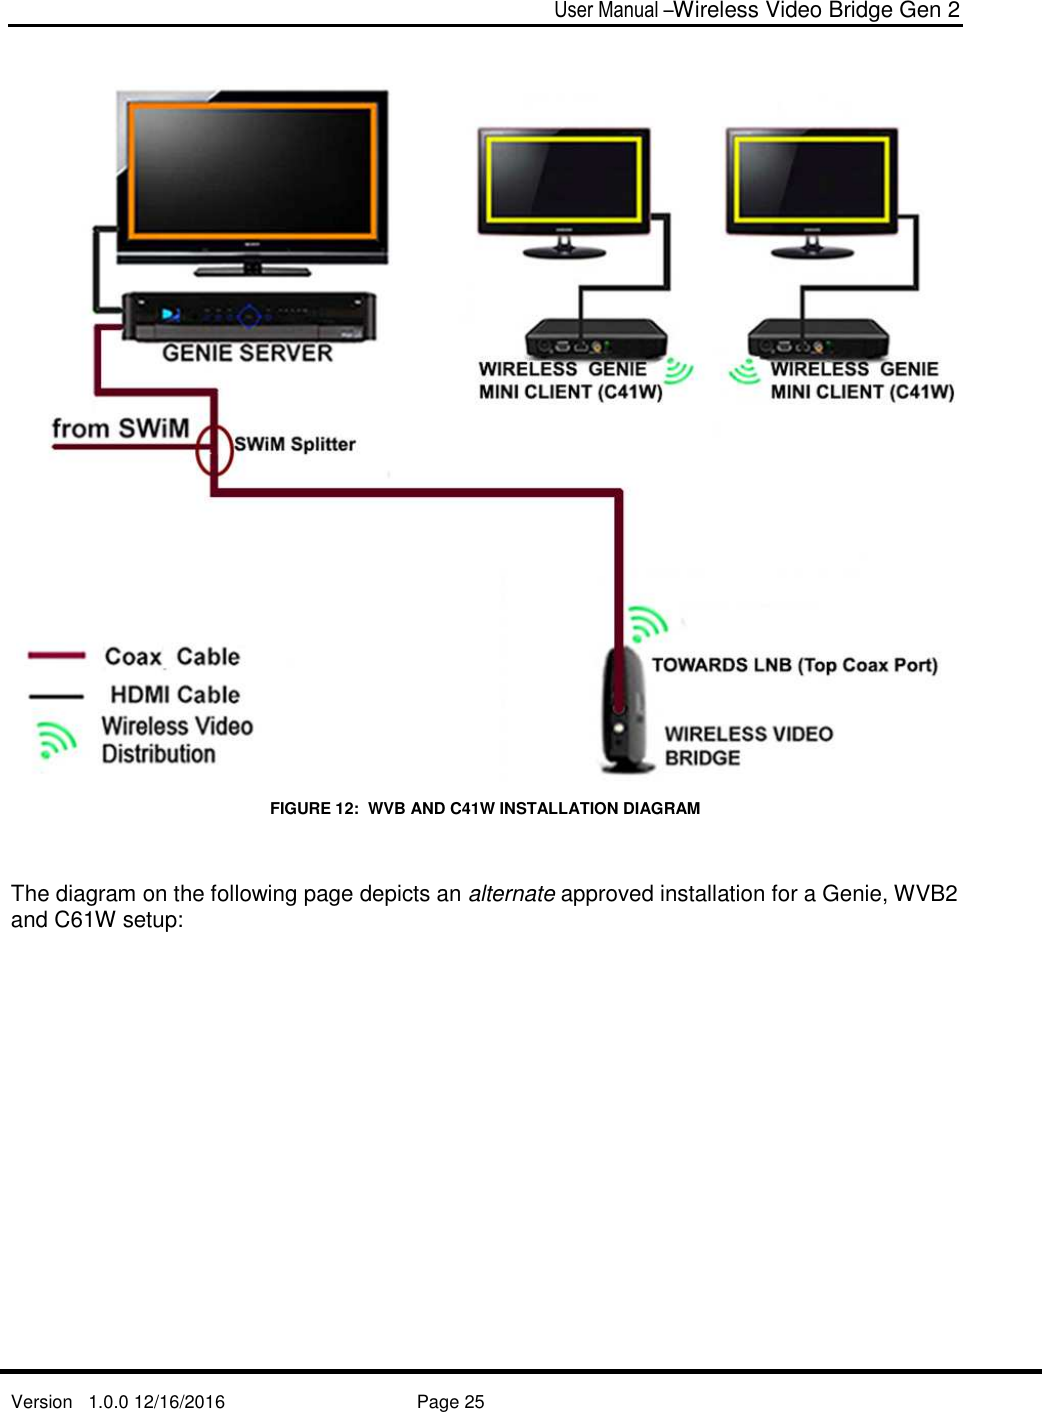  User Manual –Wireless Video Bridge Gen 2  Version   1.0.0 12/16/2016     Page 25    FIGURE 12:  WVB AND C41W INSTALLATION DIAGRAM  The diagram on the following page depicts an alternate approved installation for a Genie, WVB2 and C61W setup: 